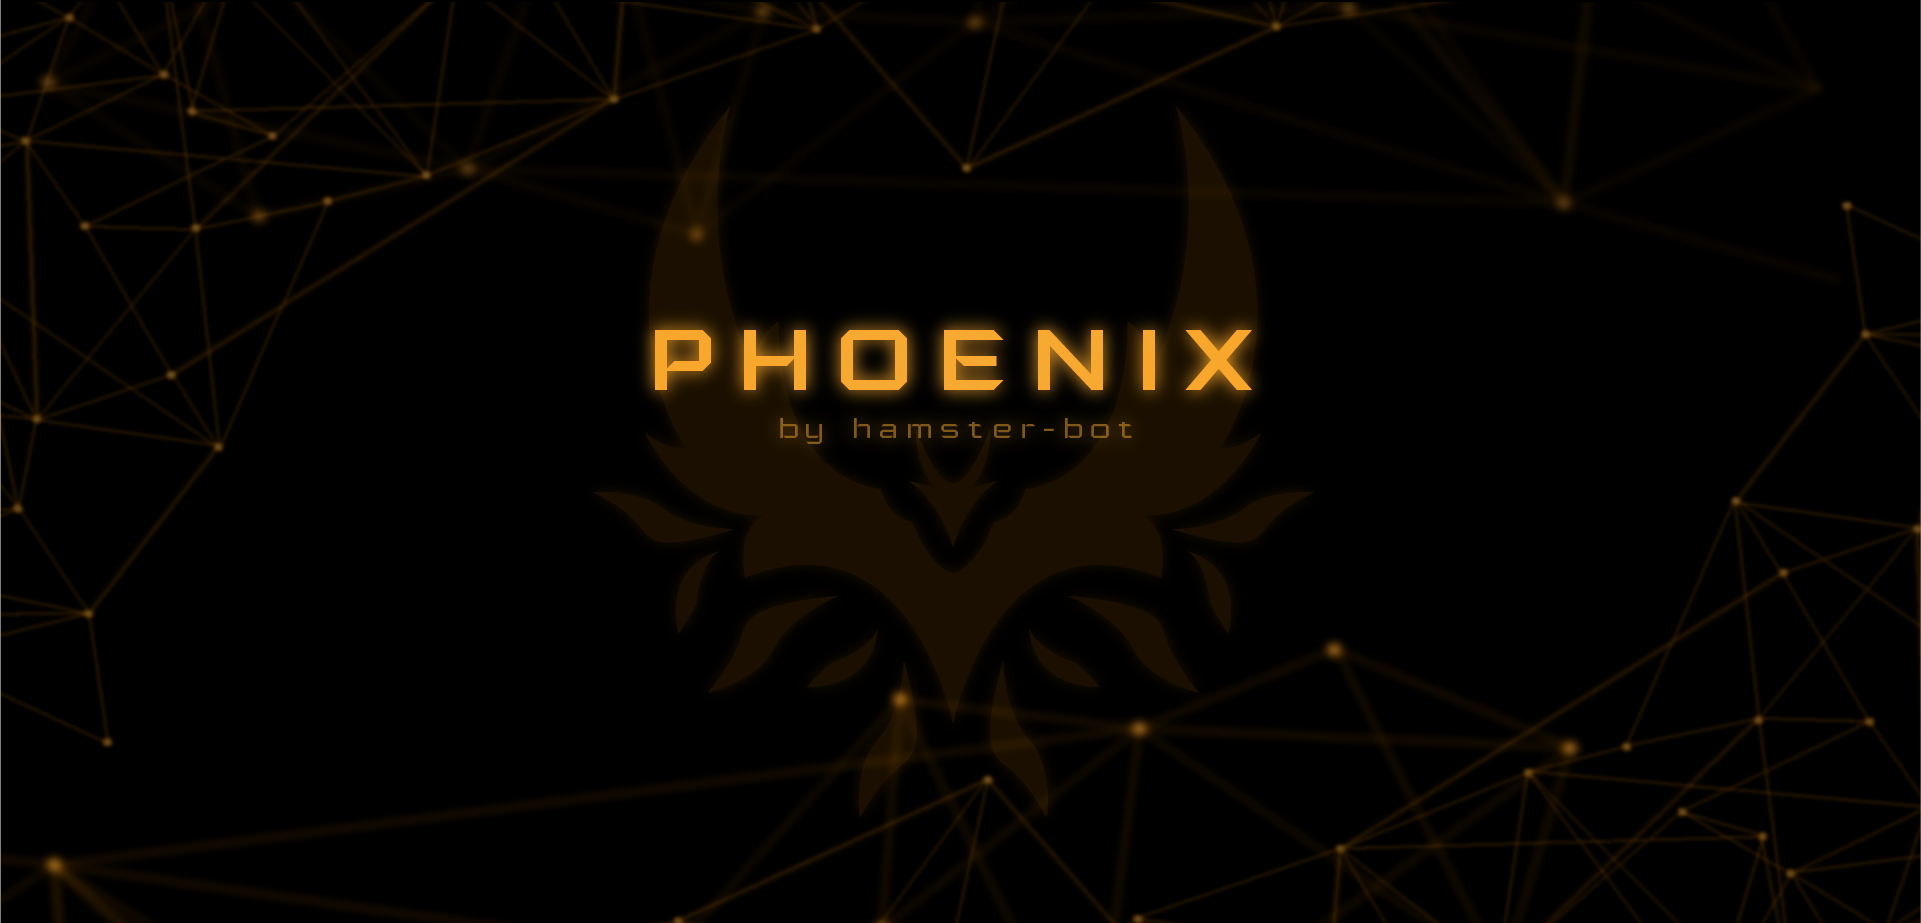 PHOENIX by hamster-bot Foundation is an official partner of FTX